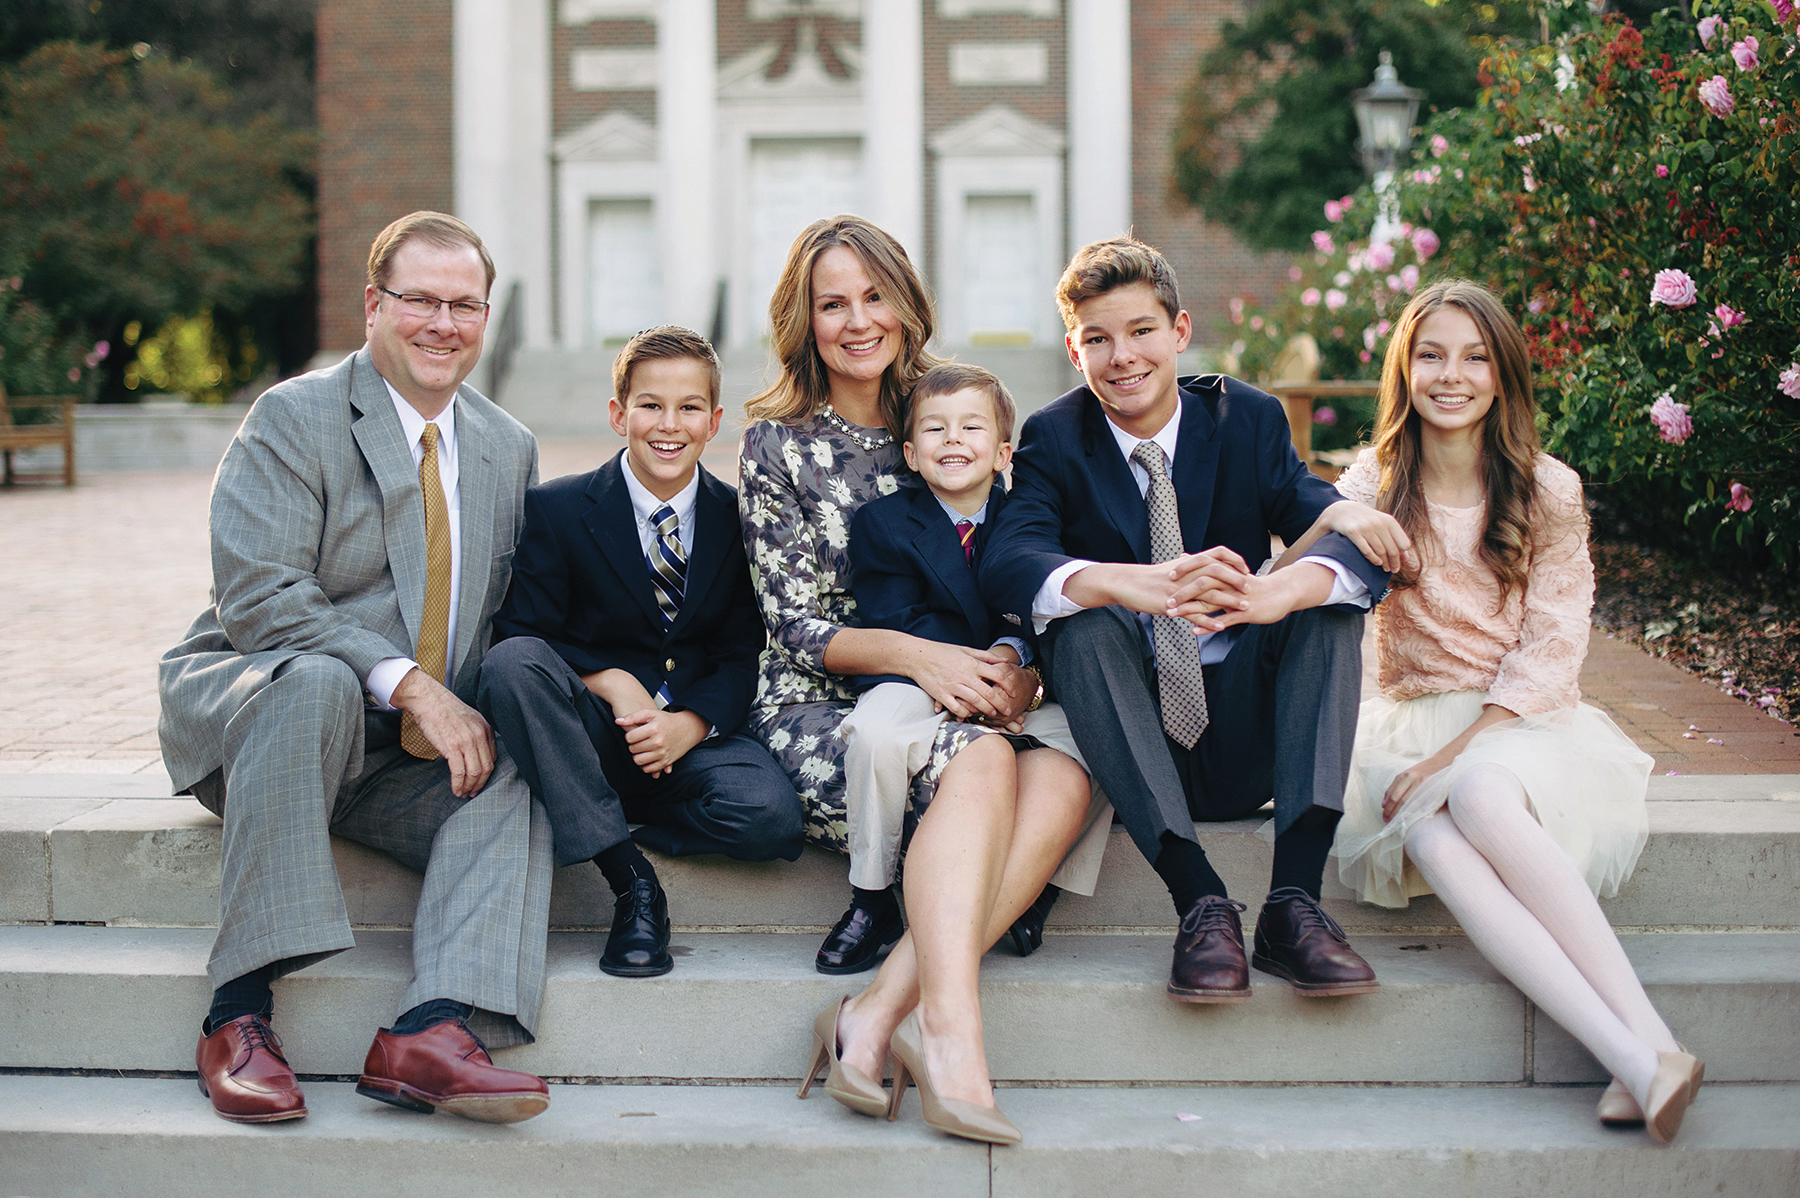 Alumni president Amy Fennegan and her husband, Garth, sit with their children Sam, Boone, Cade, and Reaves.